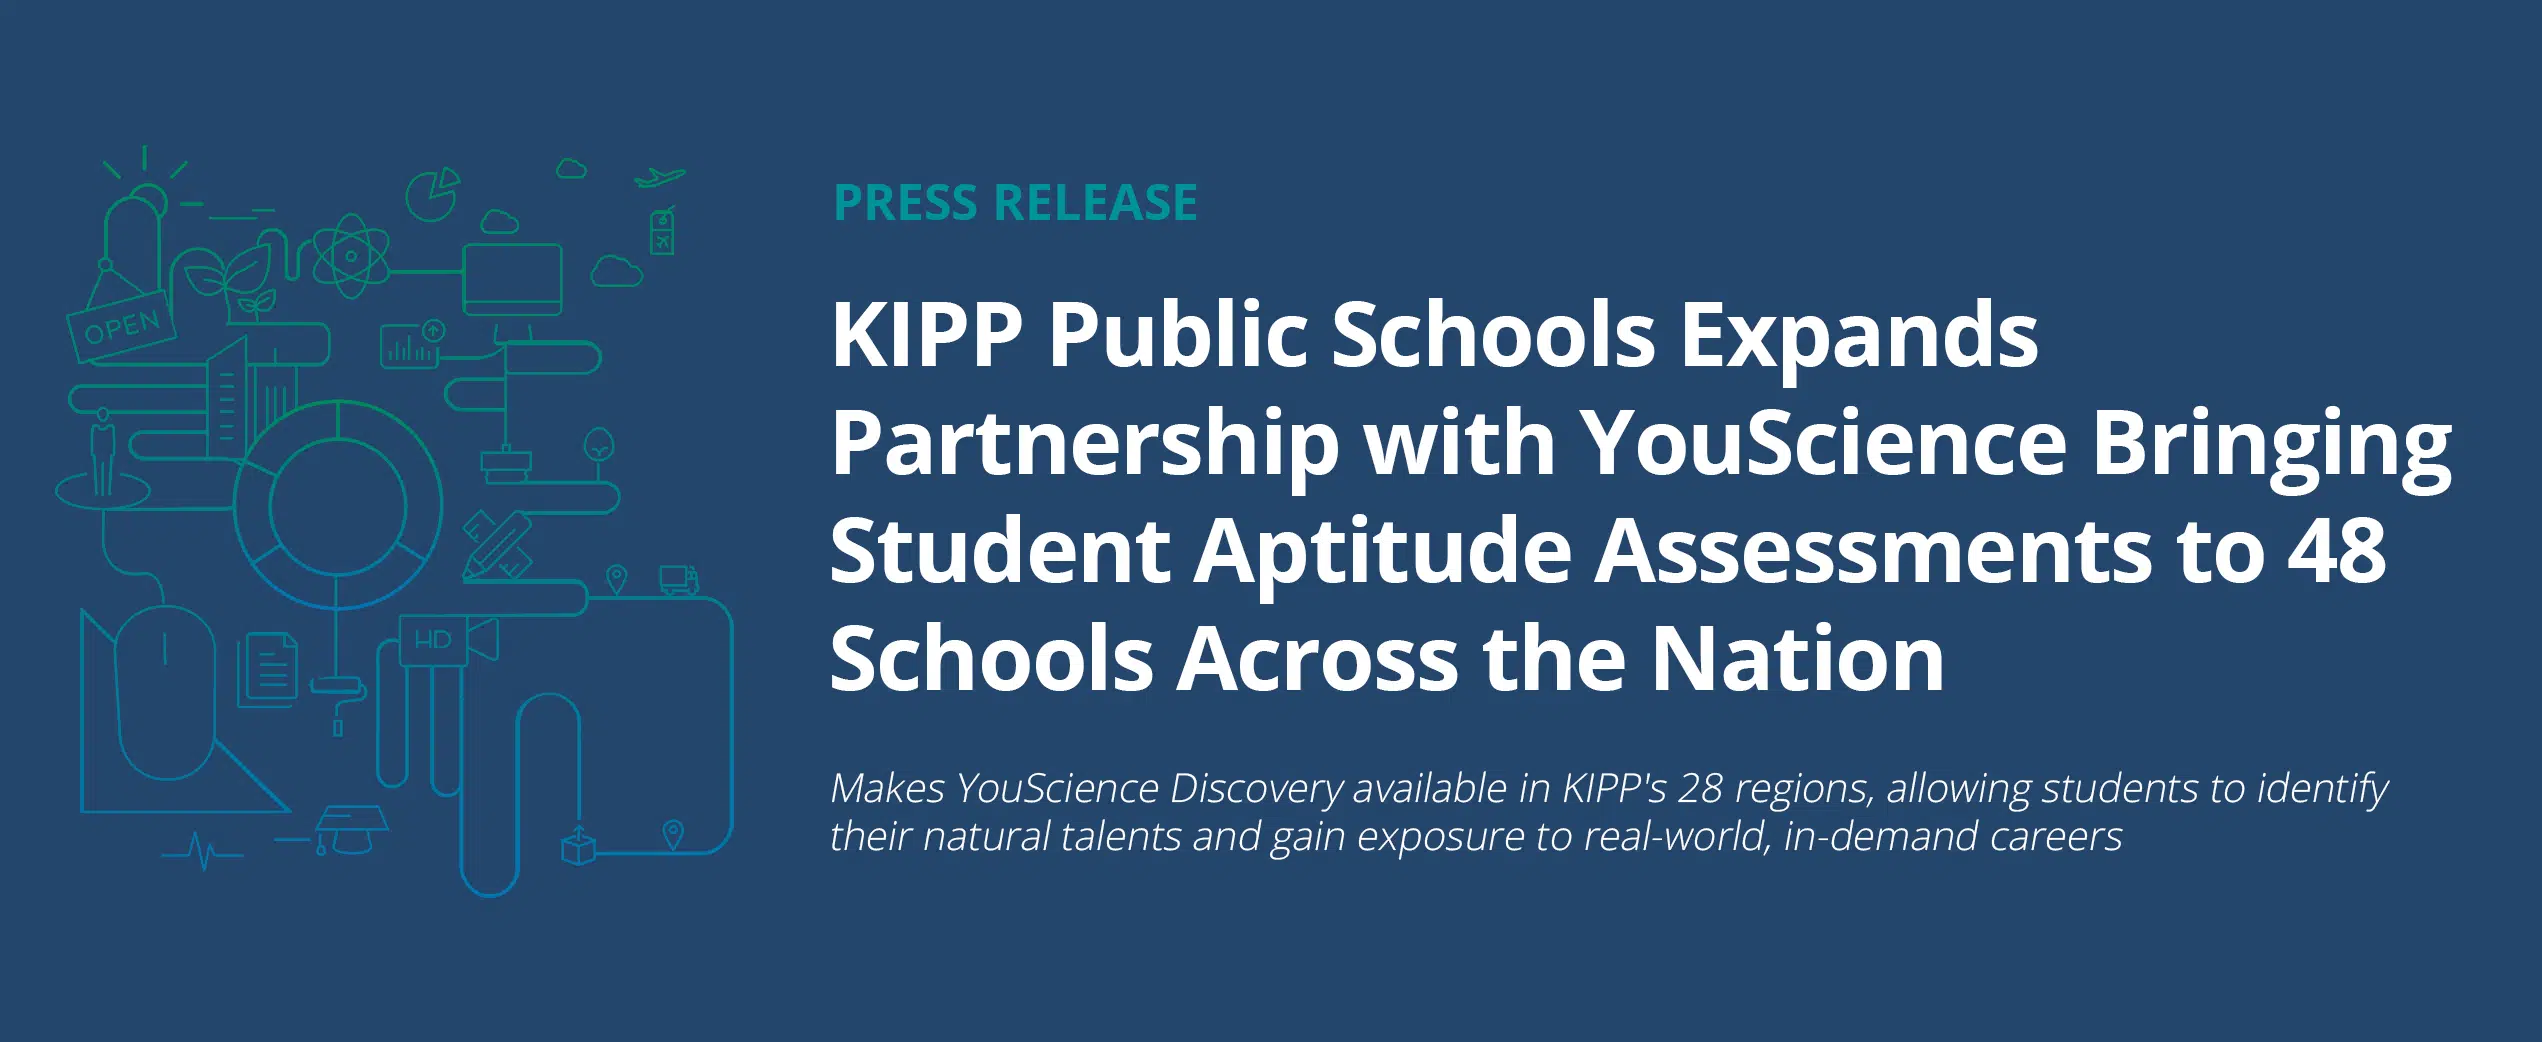 KIPP Public Schools expands partnership with YouScience bringing student aptitude assessments to 48 schools across the nation